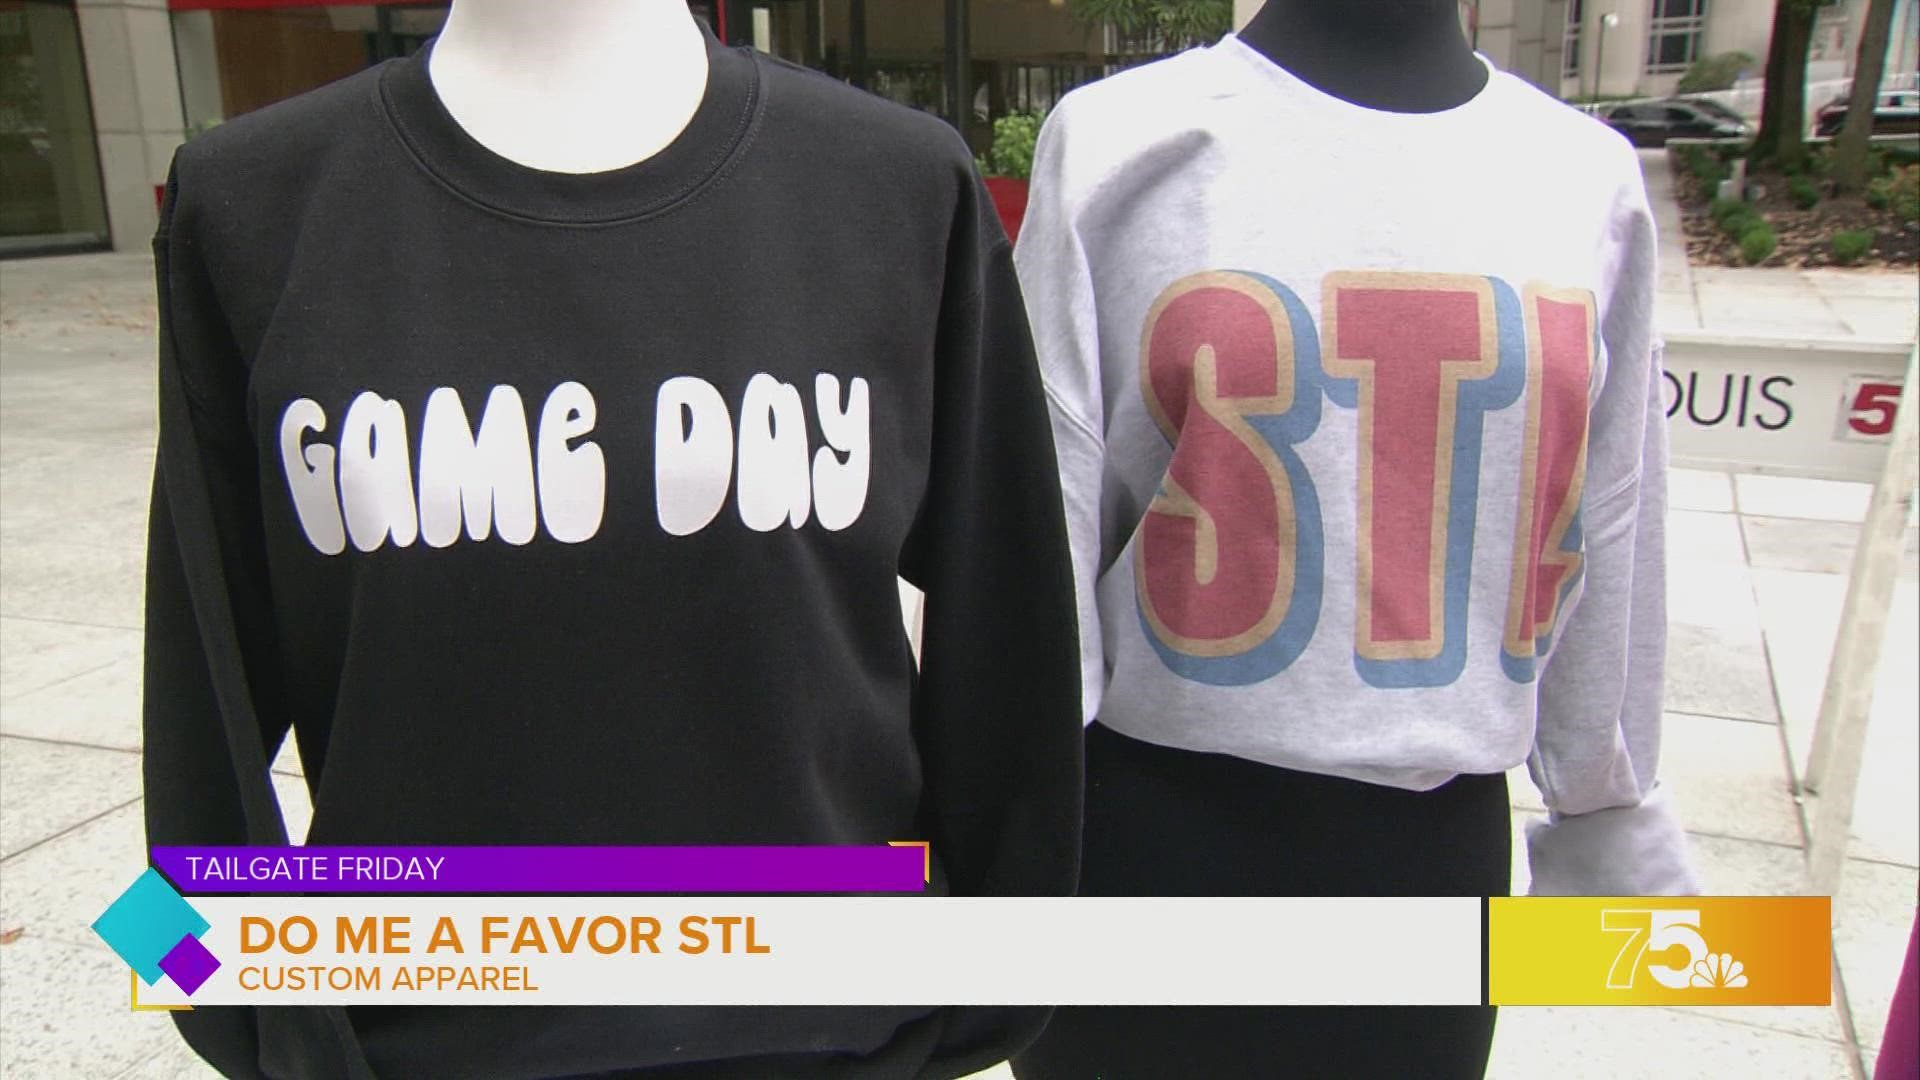 Do Me a Favor STL, is a curated shop that offers trending and custom apparel and favors.